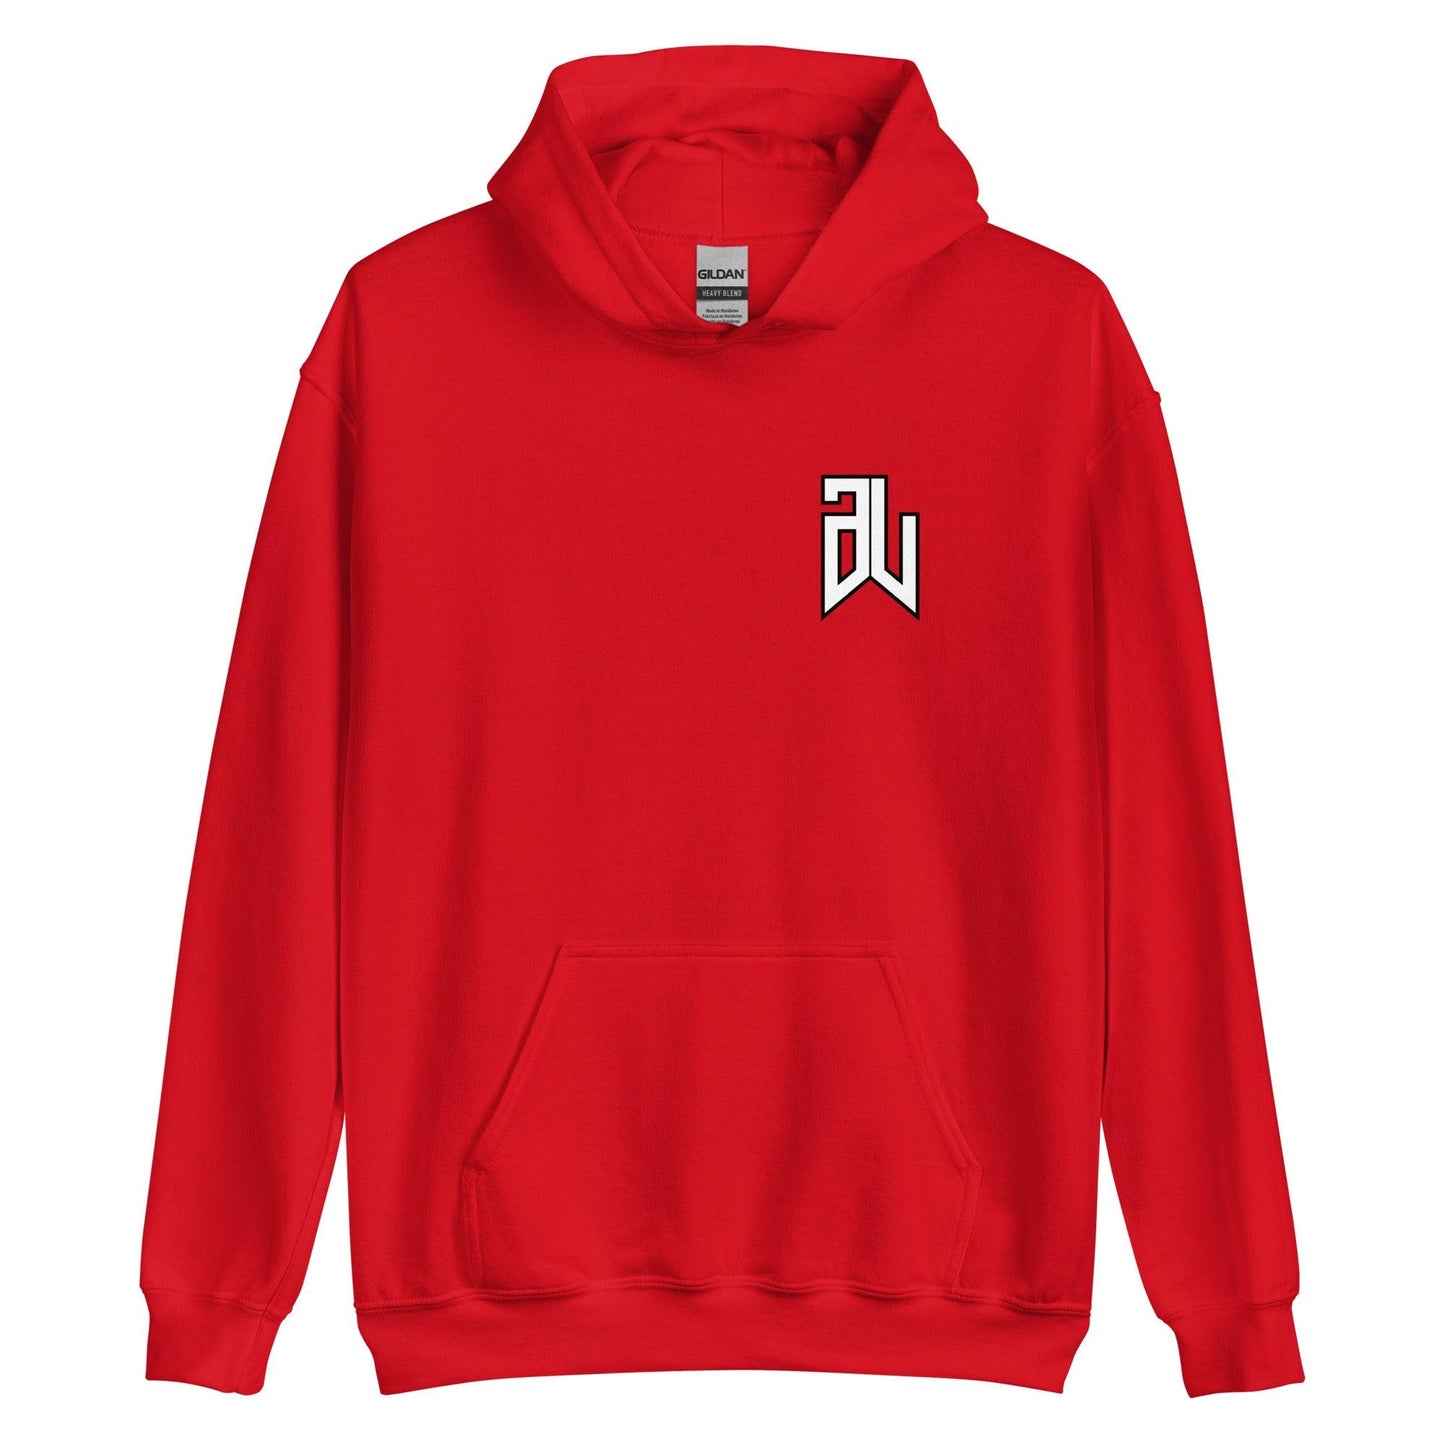 Anthony Lawrence "Elite" Hoodie - Fan Arch